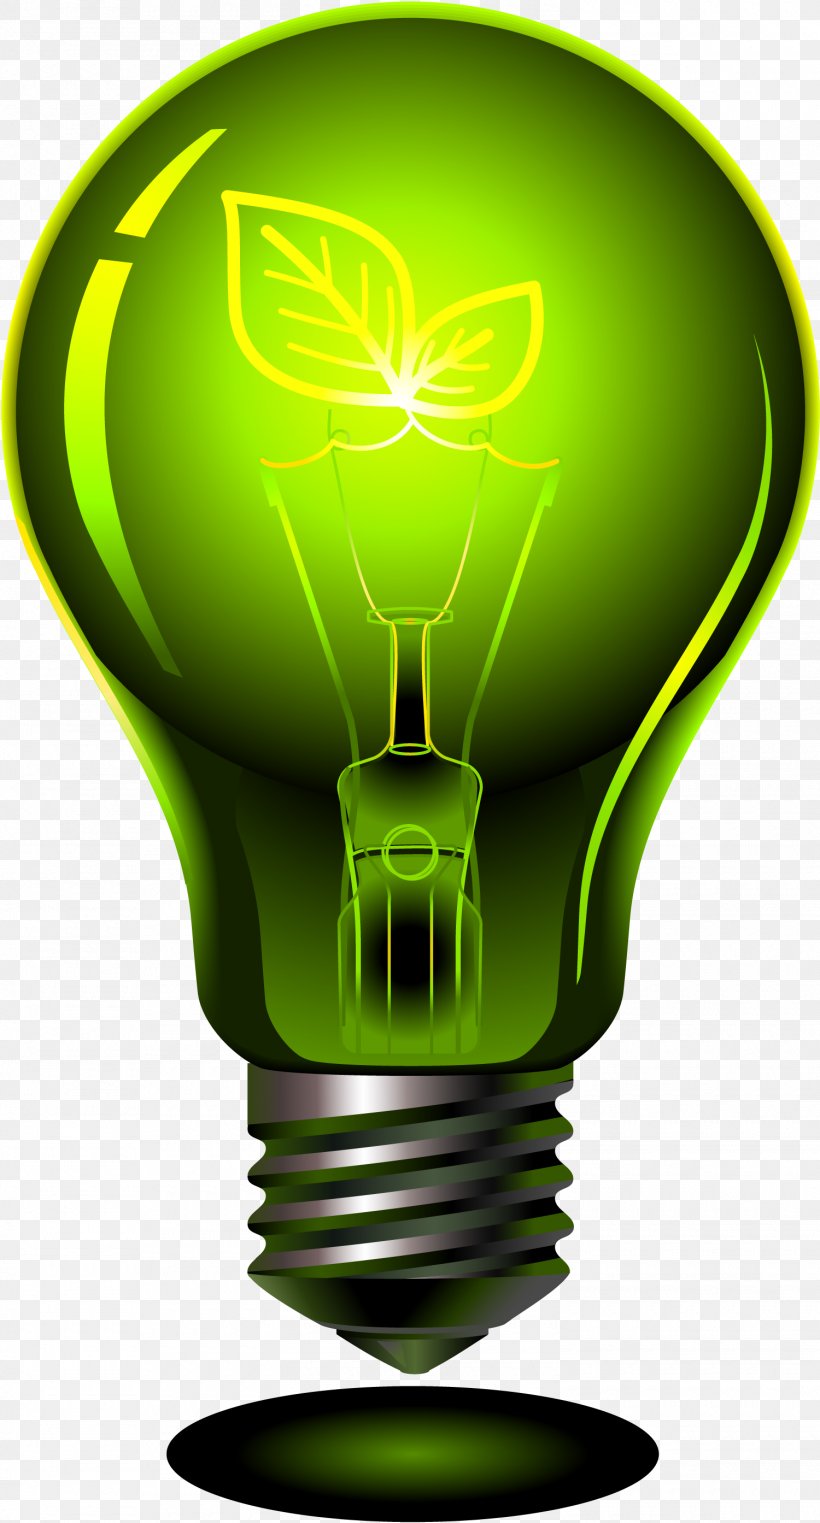 Incandescent Light Bulb Green Lamp, PNG, 1500x2787px, Light, Electric Light, Energy, Flashlight, Green Download Free